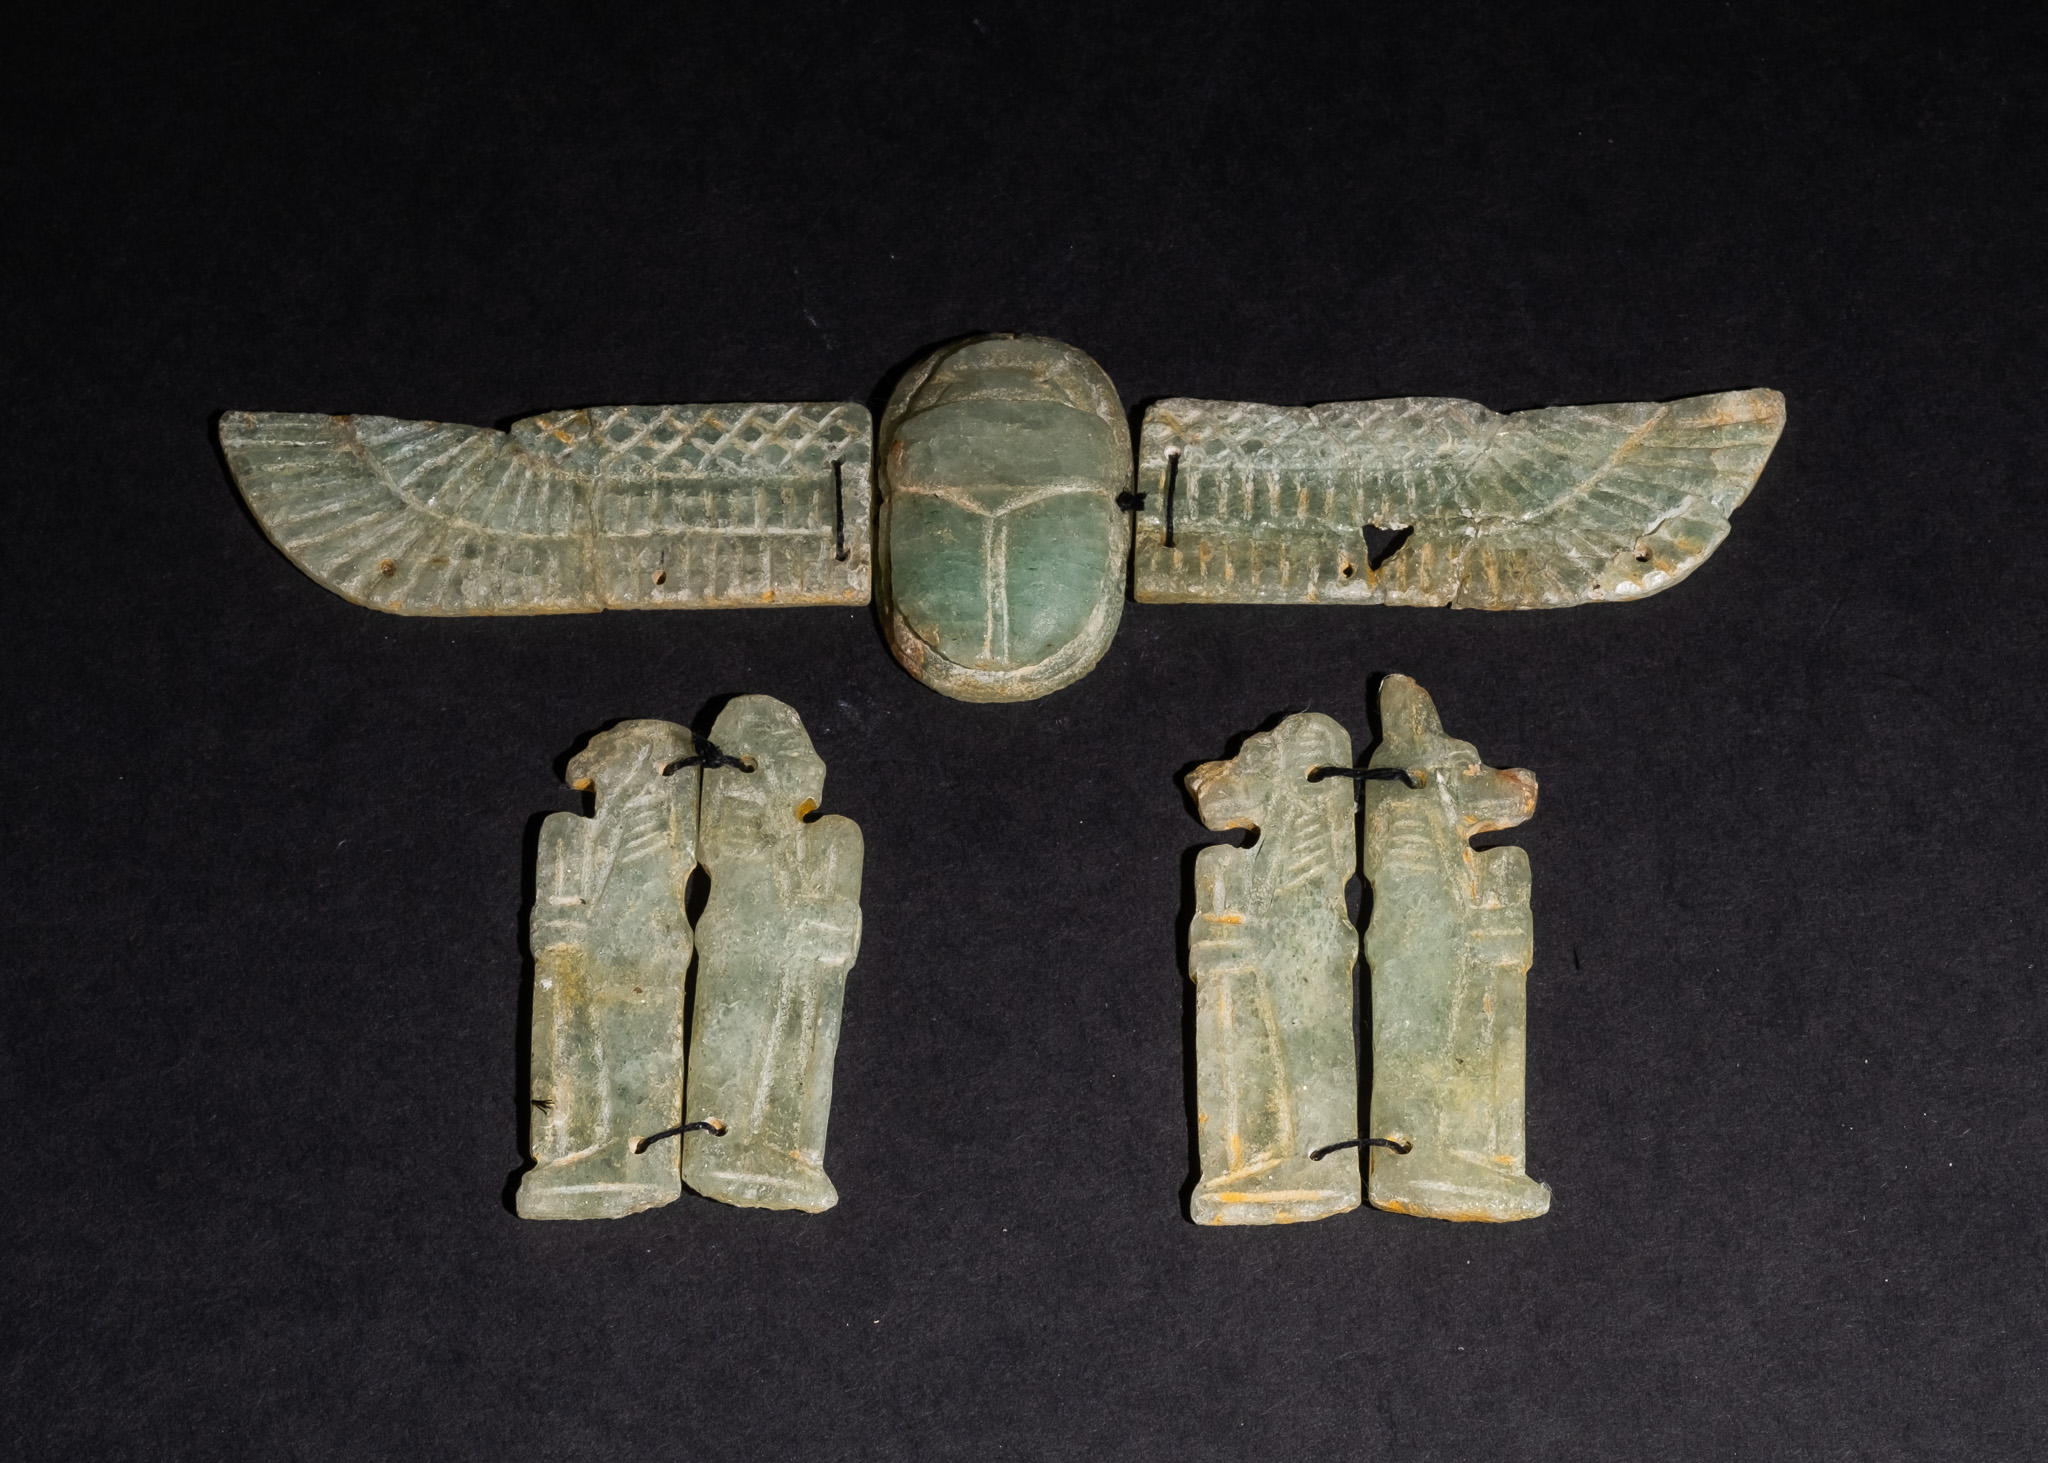 A HIGHLY RARE EGYPTIAN AGATE ENGRAVED WINGED SCARAB & BASTET AND PHARAOH AMULETS